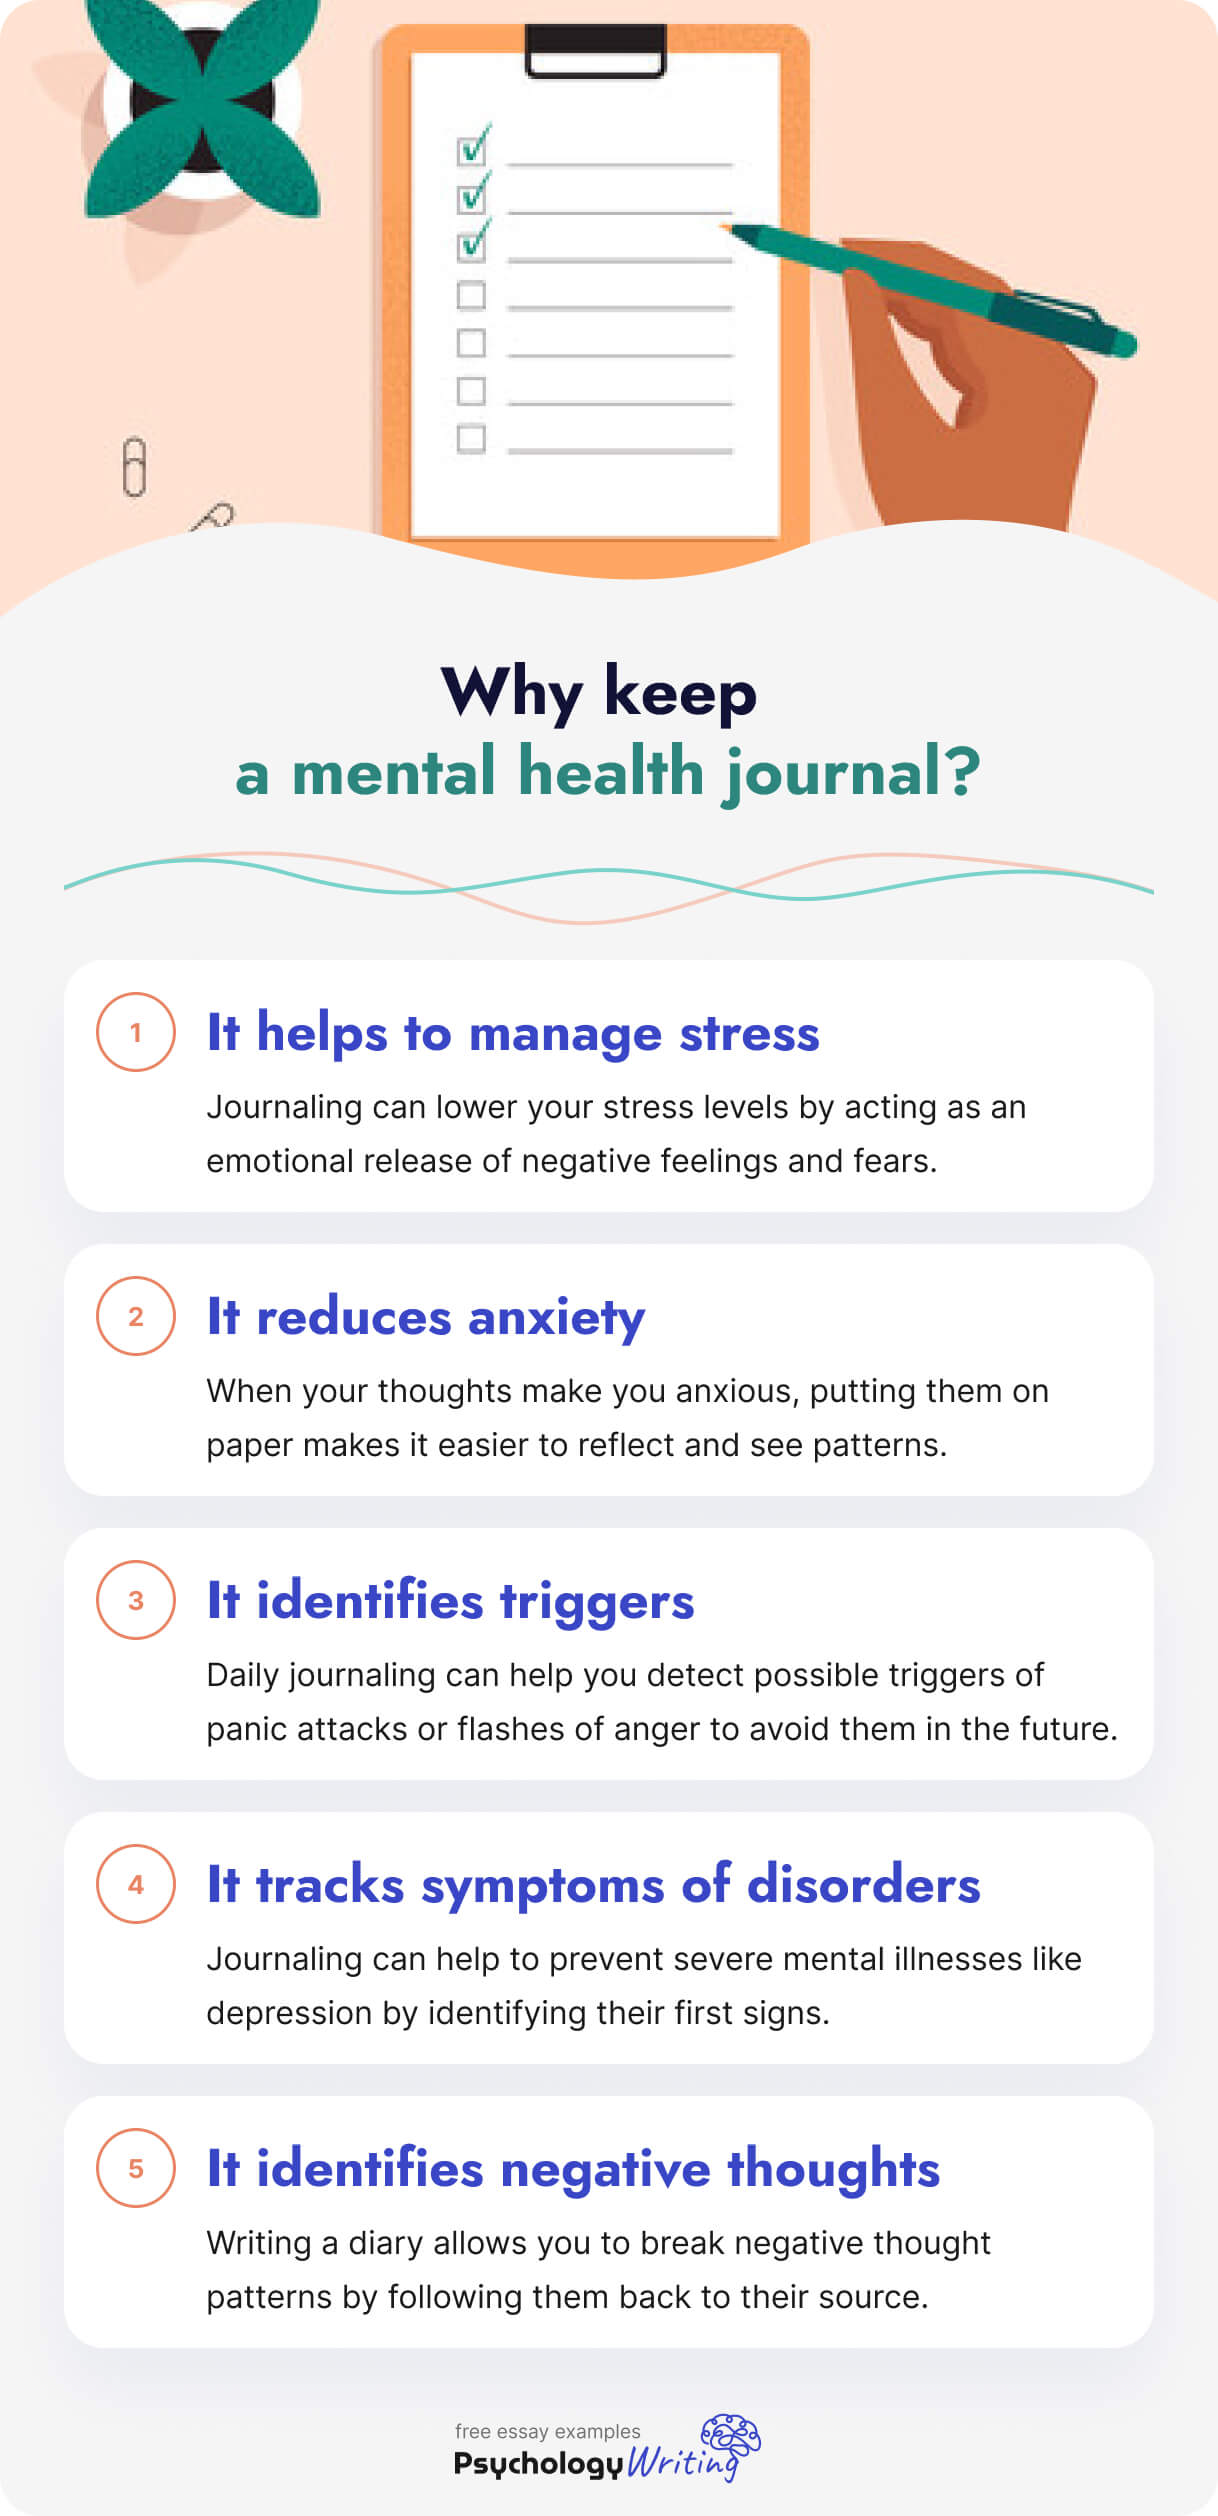 The picture lists the benefits of keeping a mental health journal.